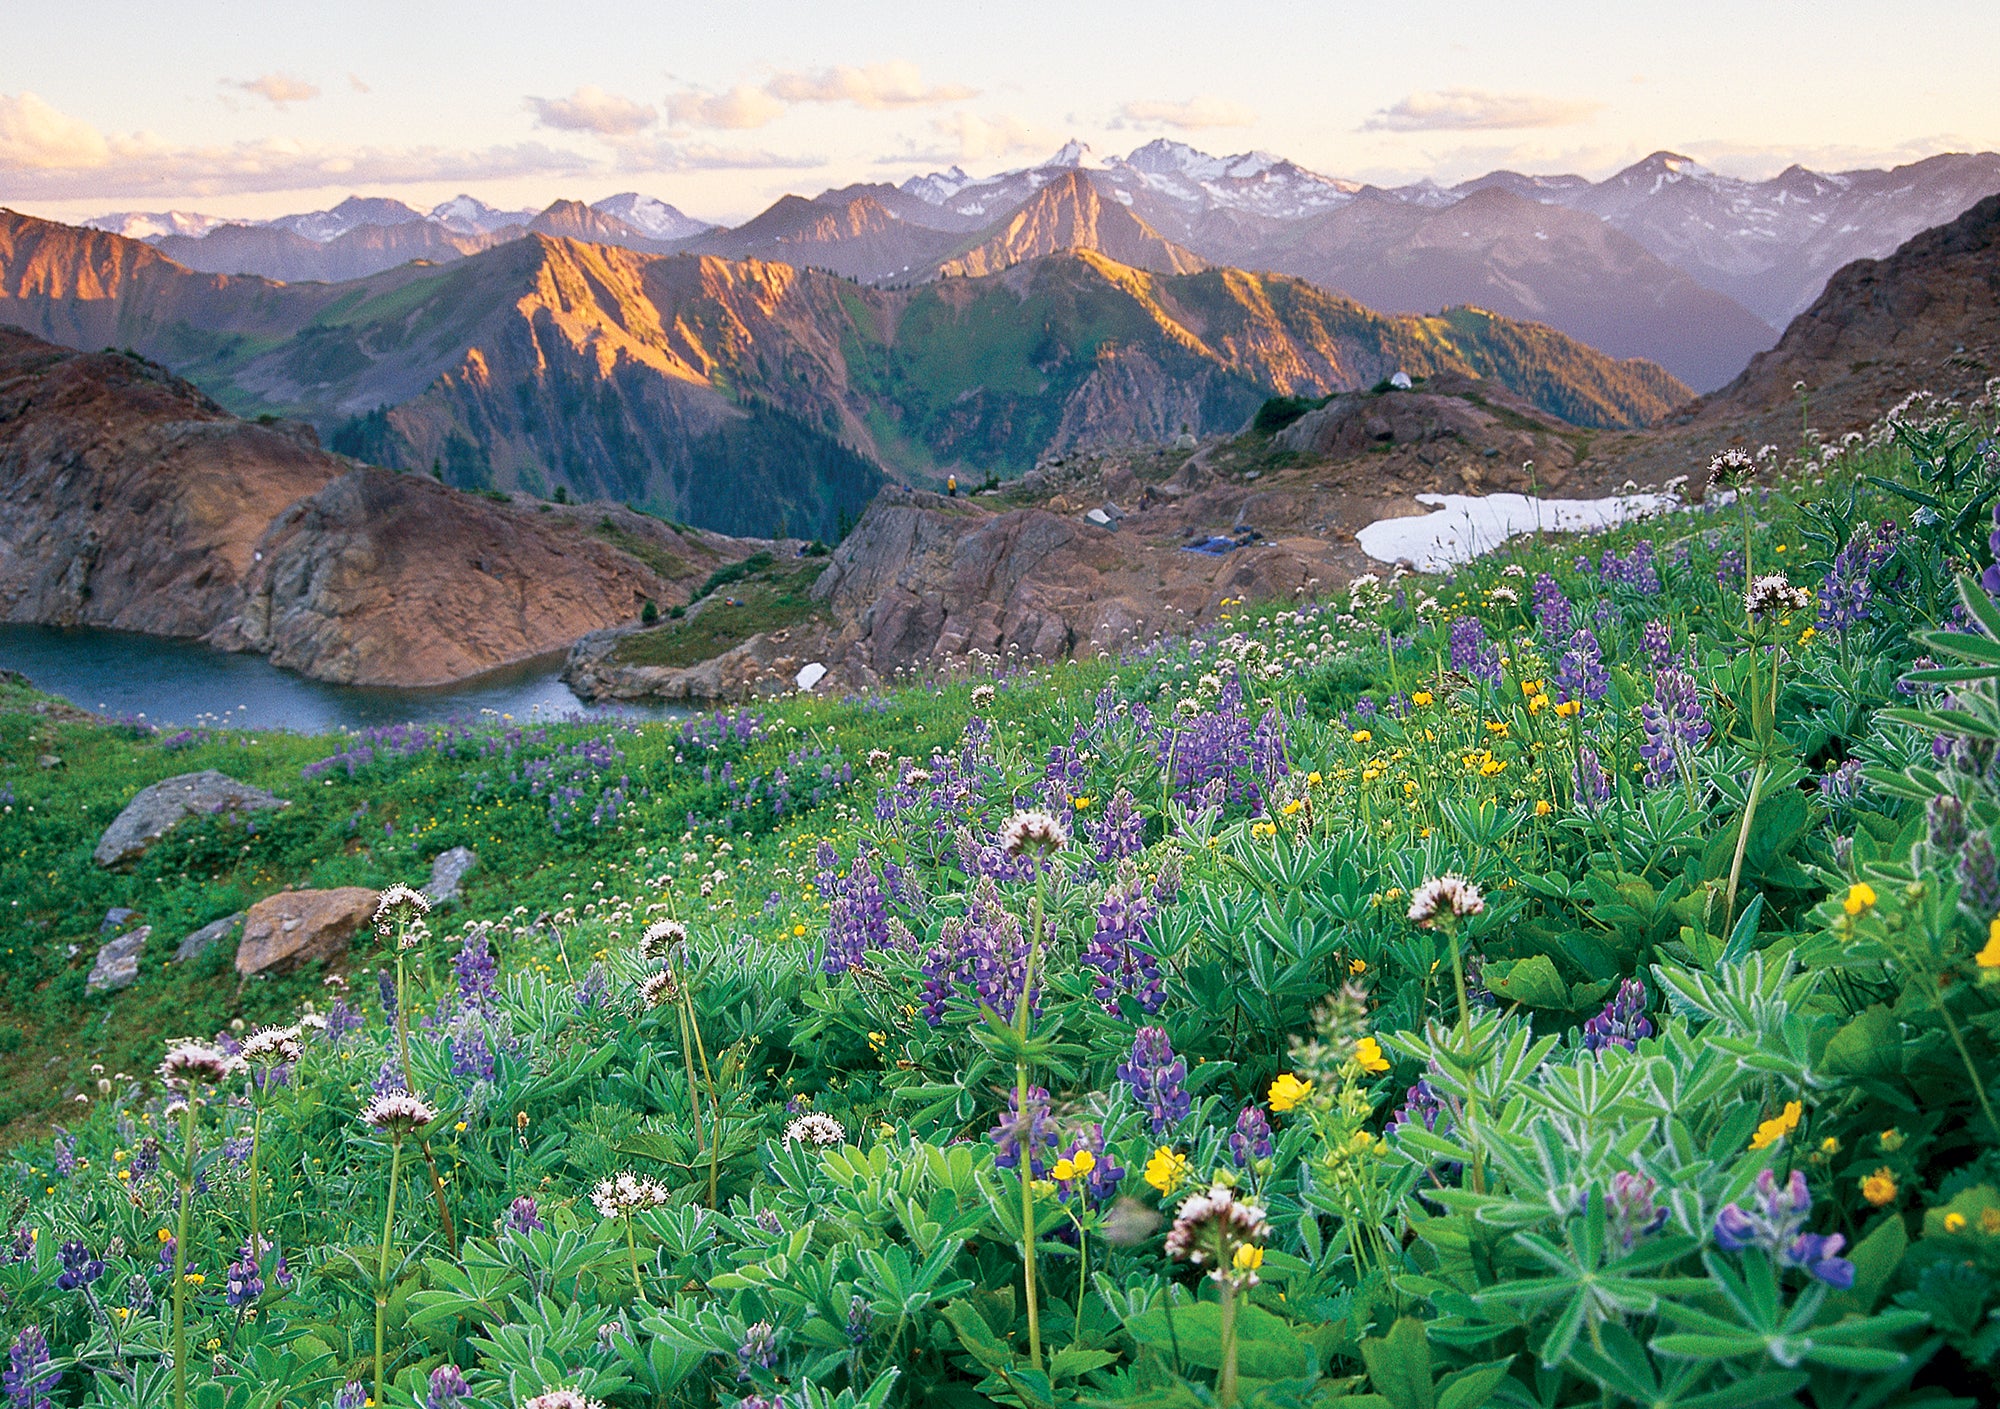 A valley of flowers. End of image description.